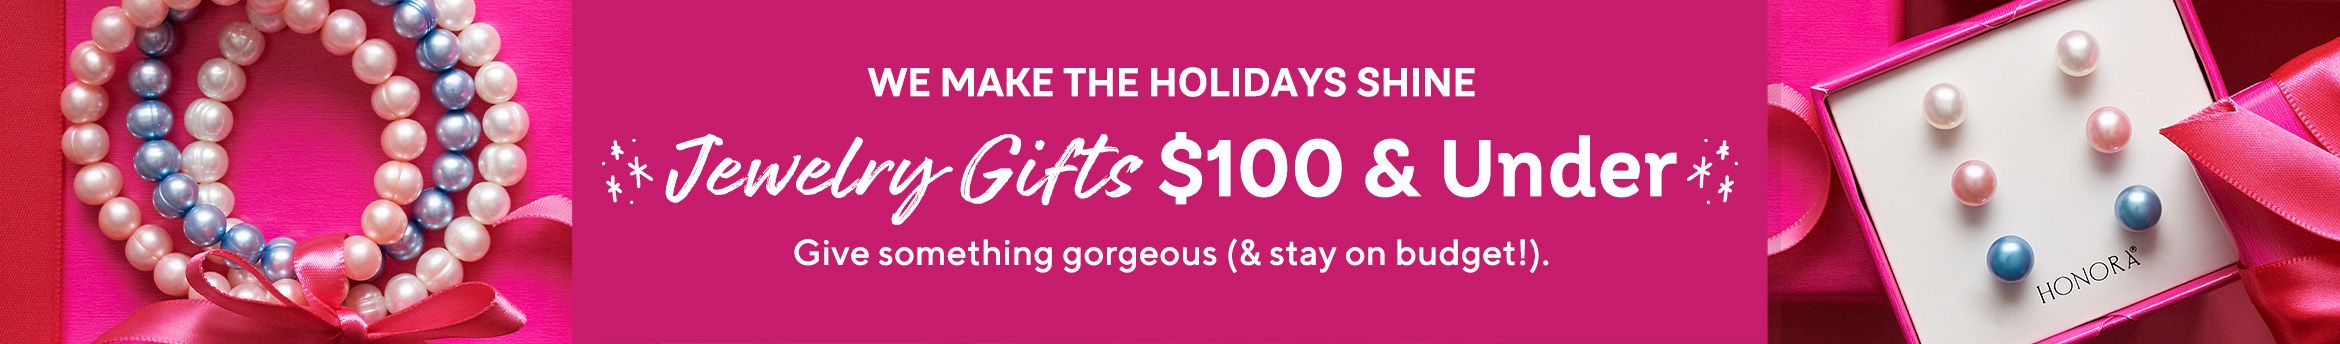 We Make the Holidays Shine. Jewelry Gifts $100 & Under. Give something gorgeous (& stay on budget!).